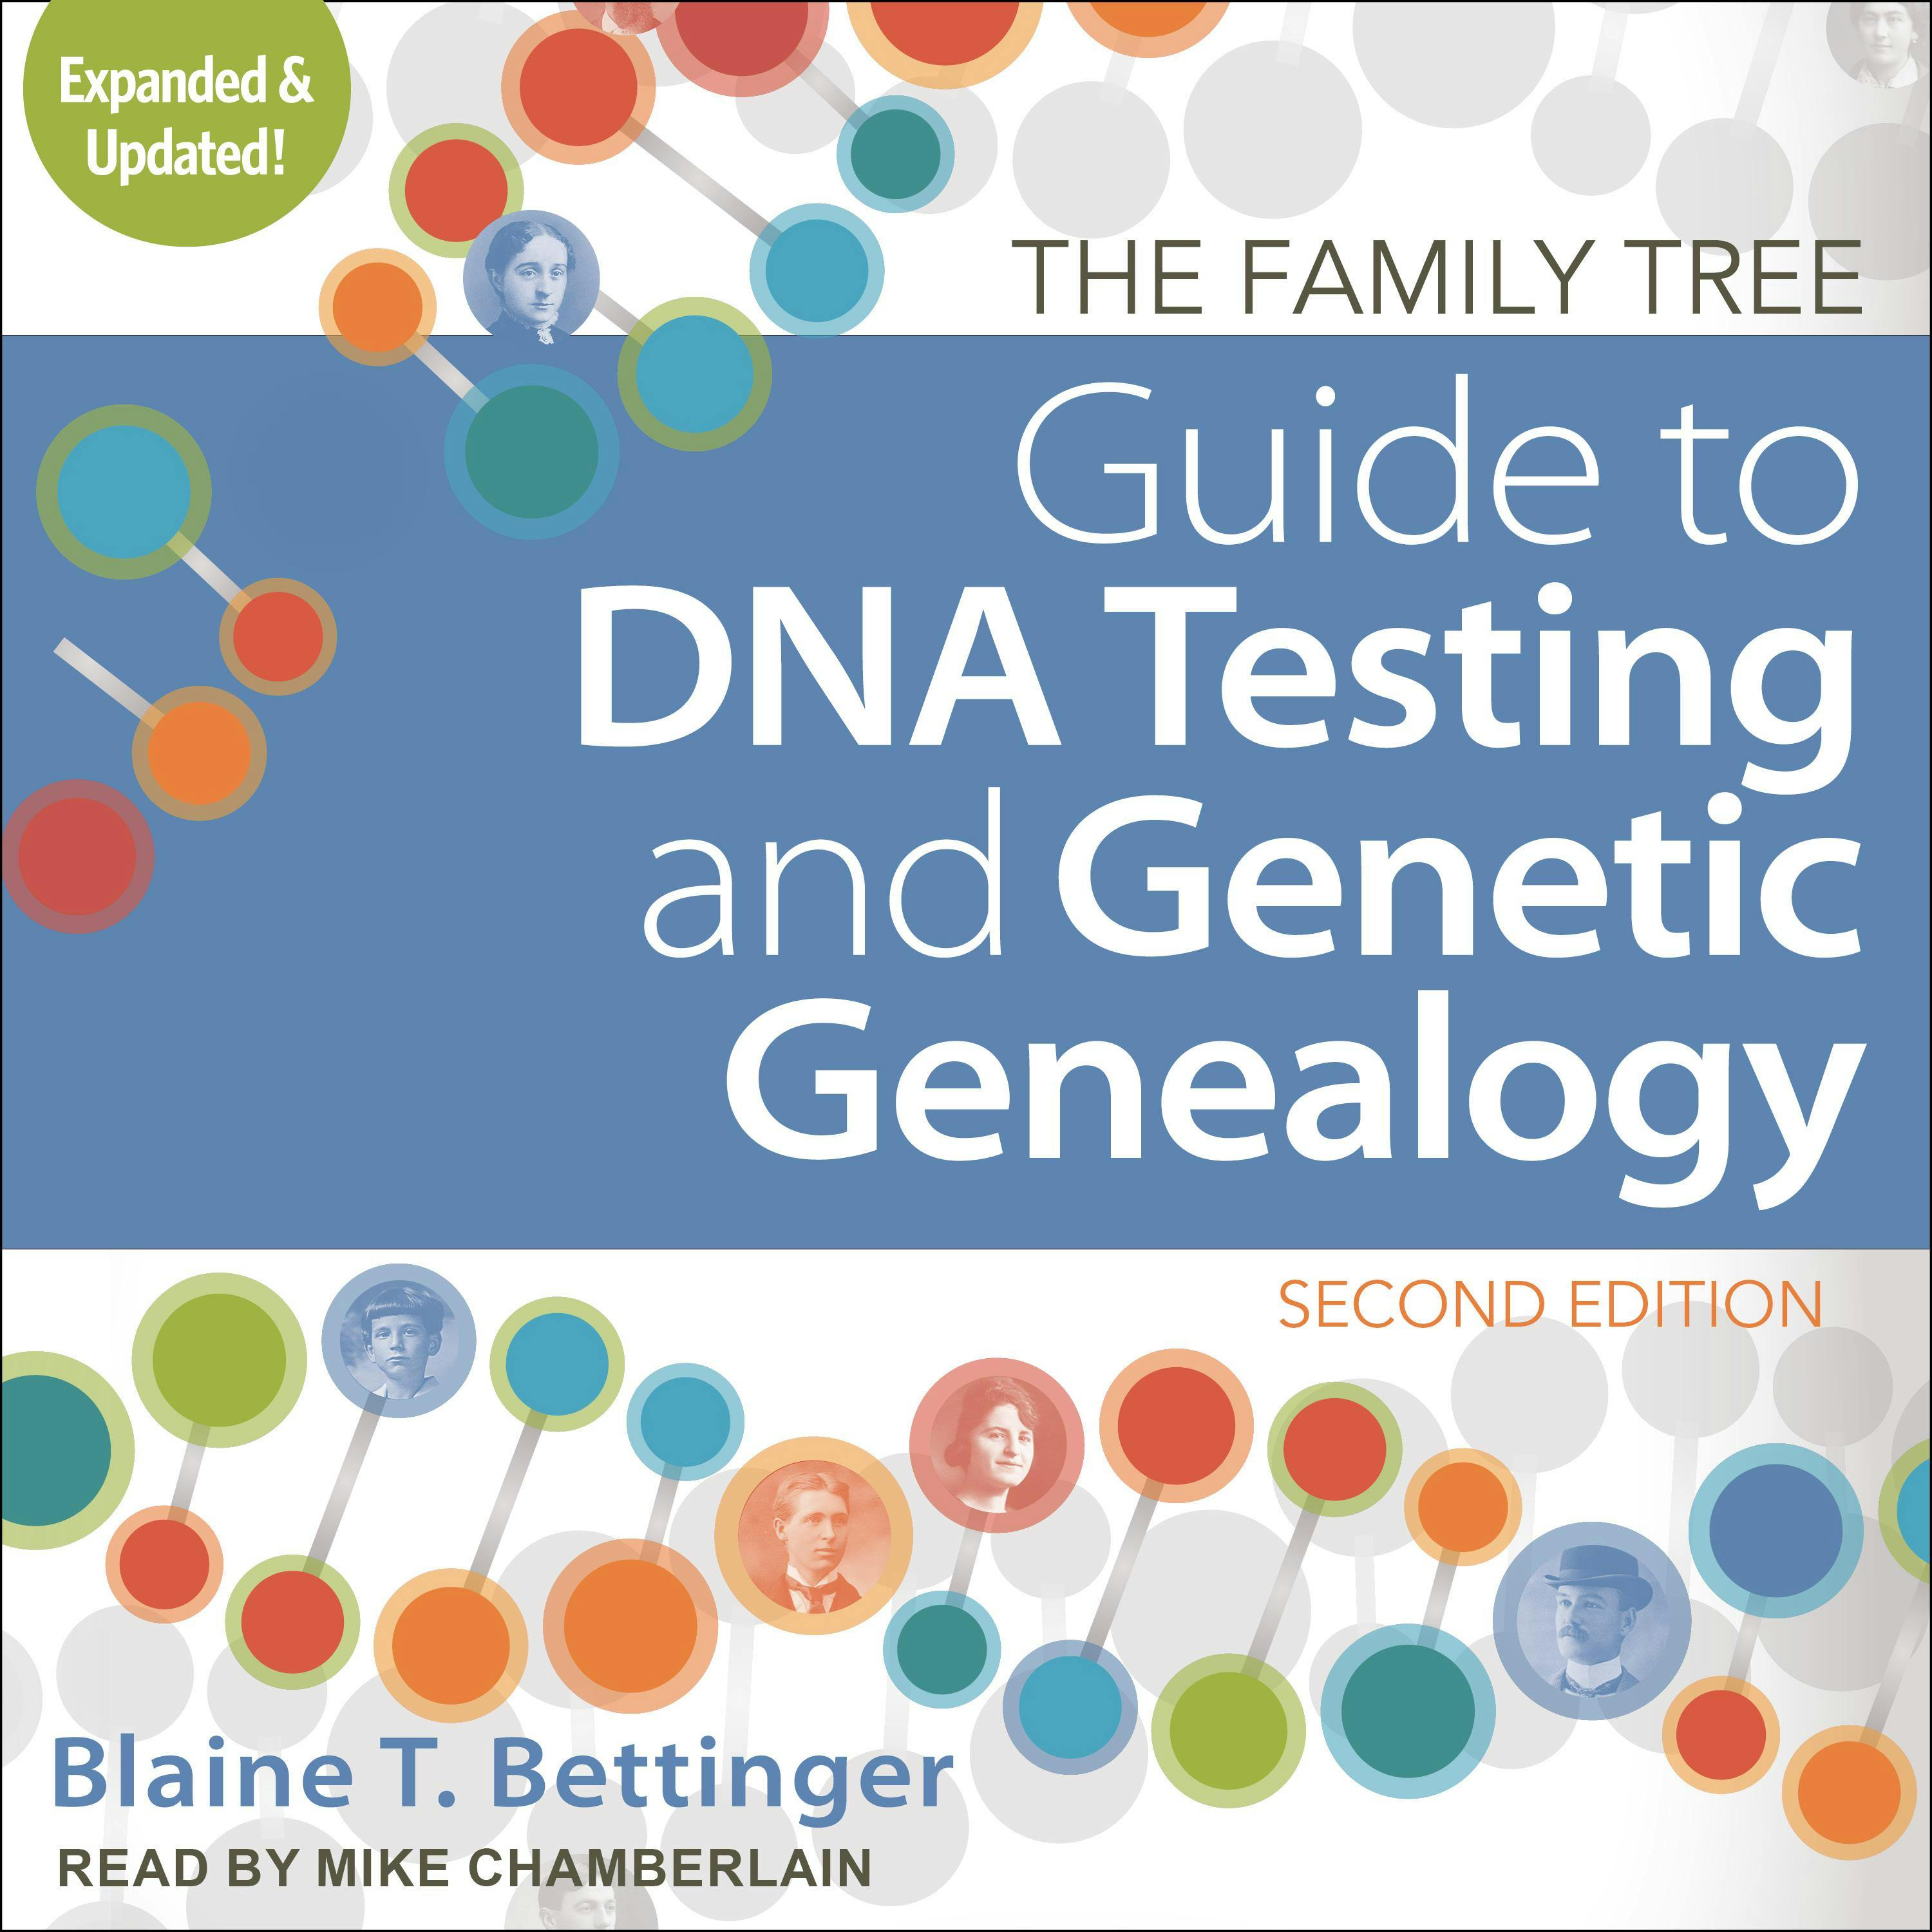 The Family Tree Guide to DNA Testing and Genetic Genealogy: Second Edition - Blaine T. Bettinger